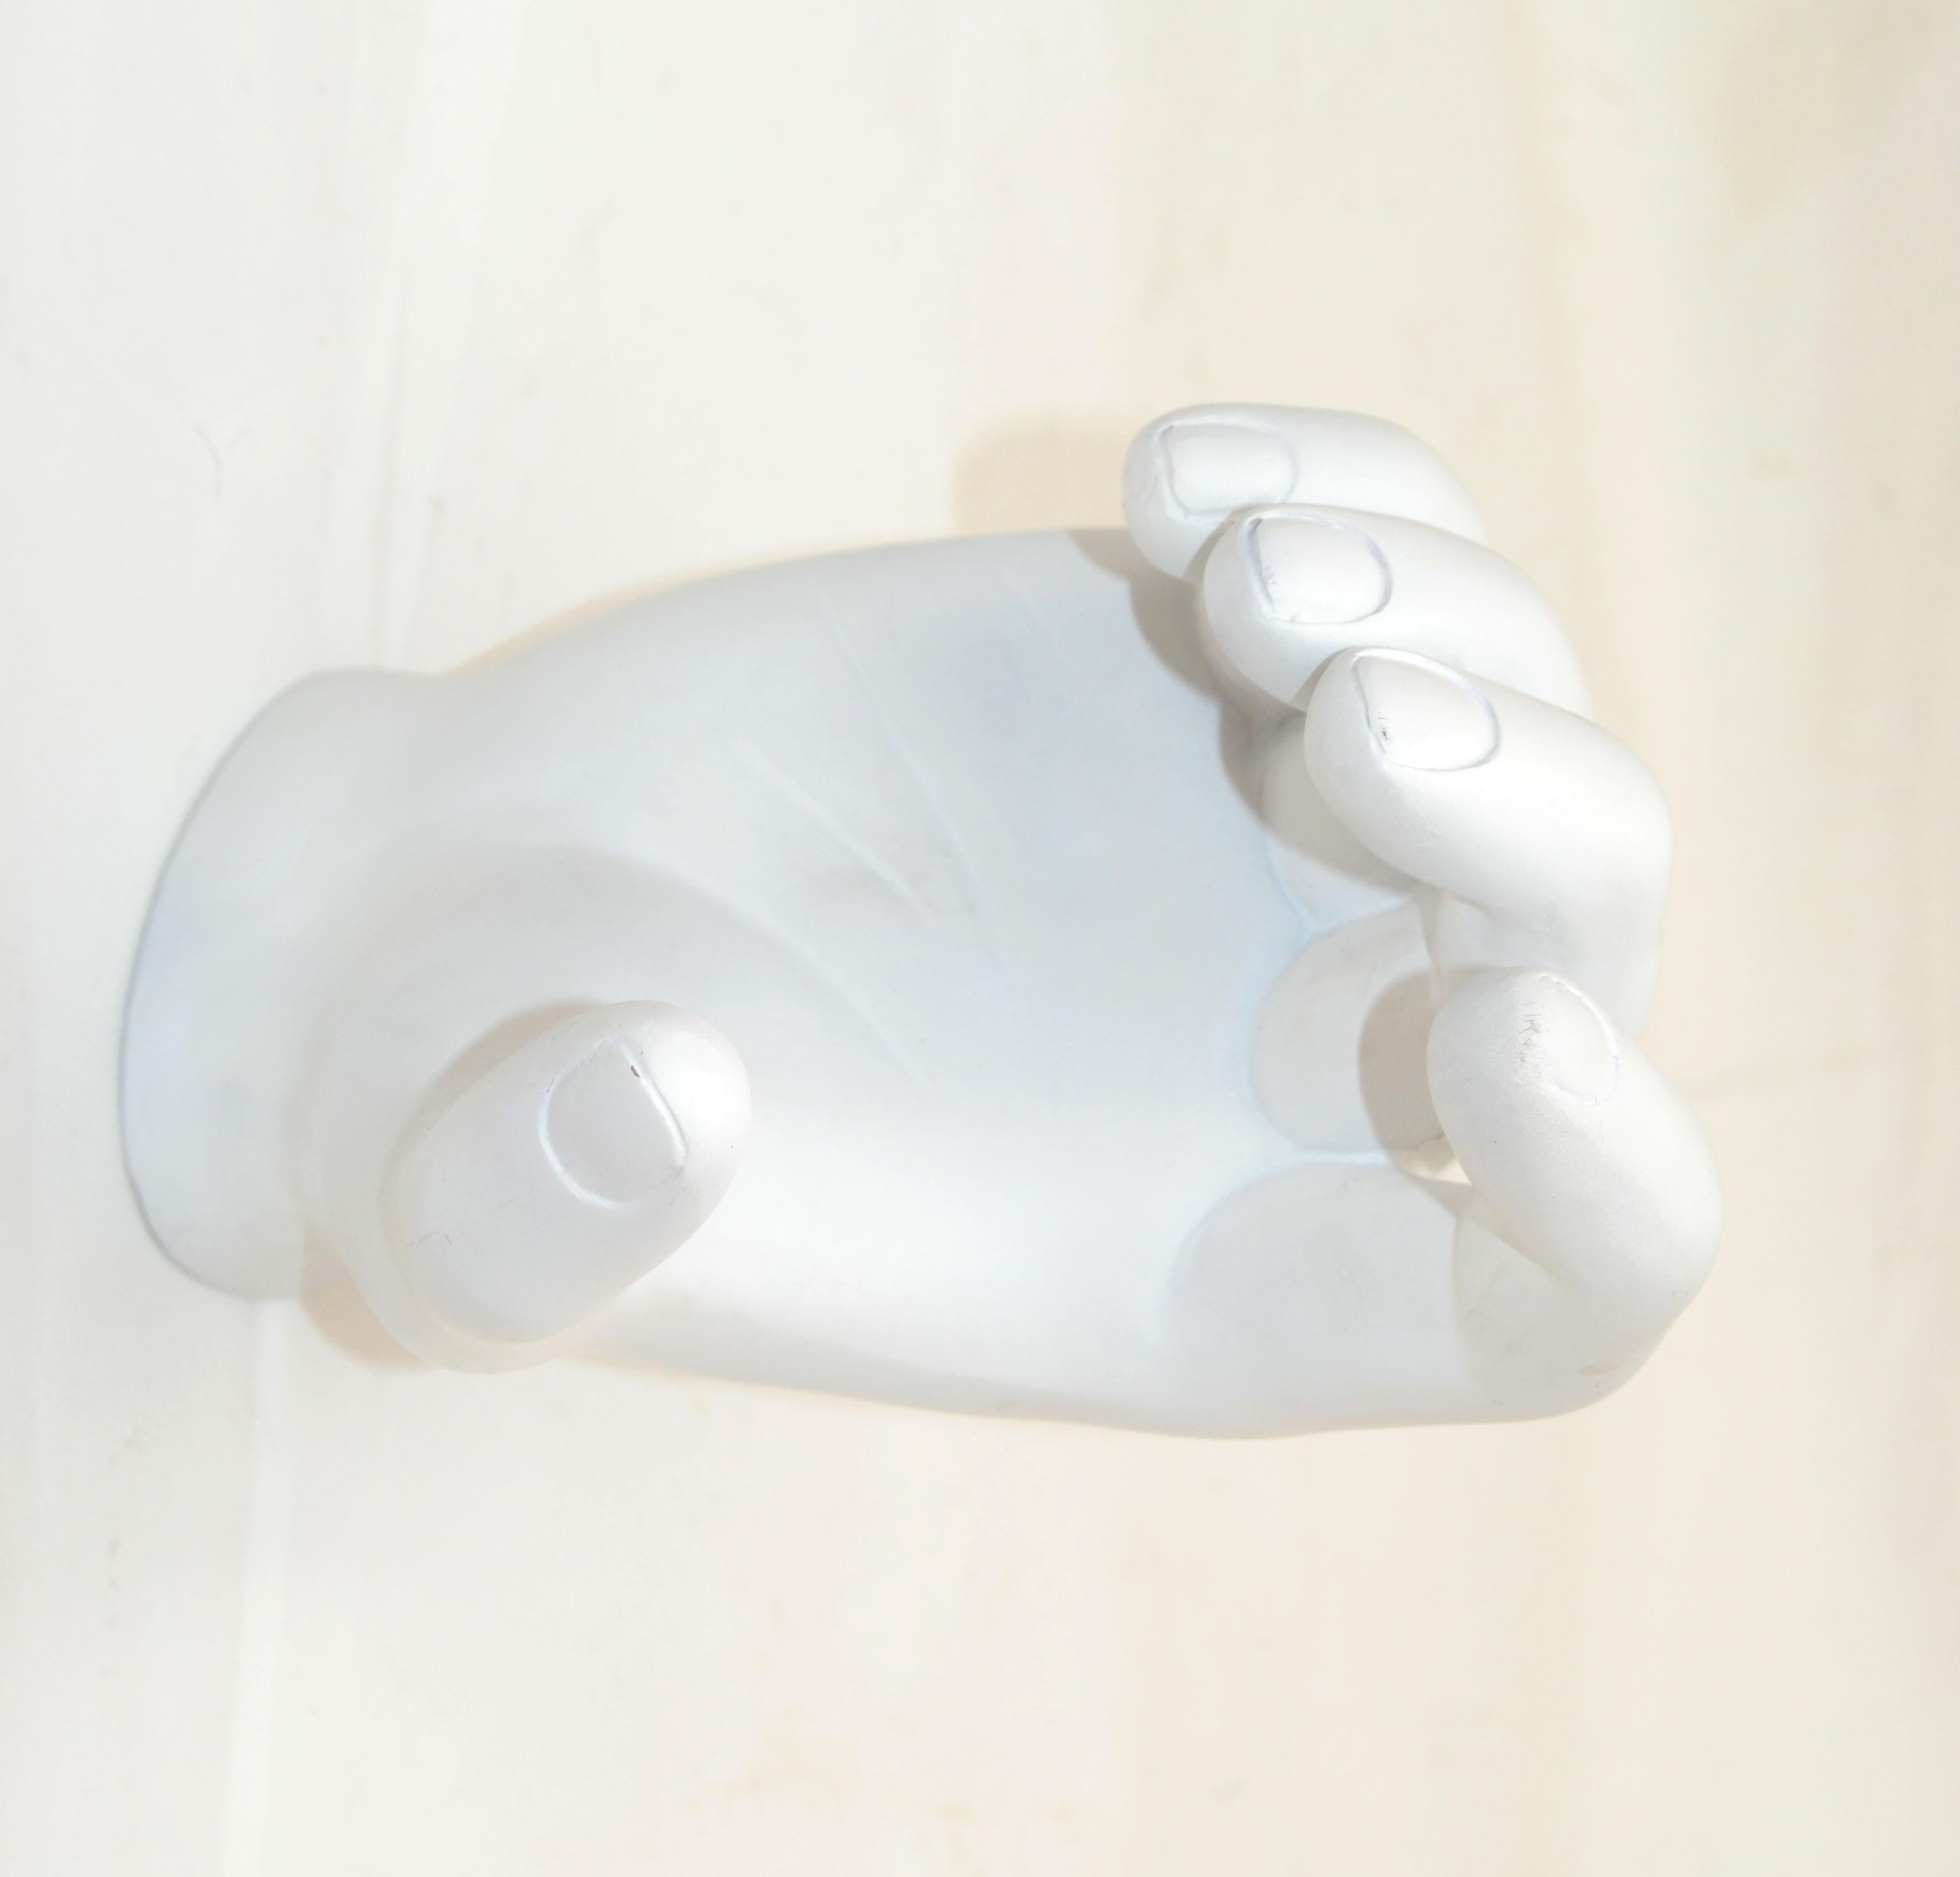 White Resin Wall Mounted Figurative Hand Sculpture Mid-Century Modern Key Holder In Good Condition For Sale In Miami, FL